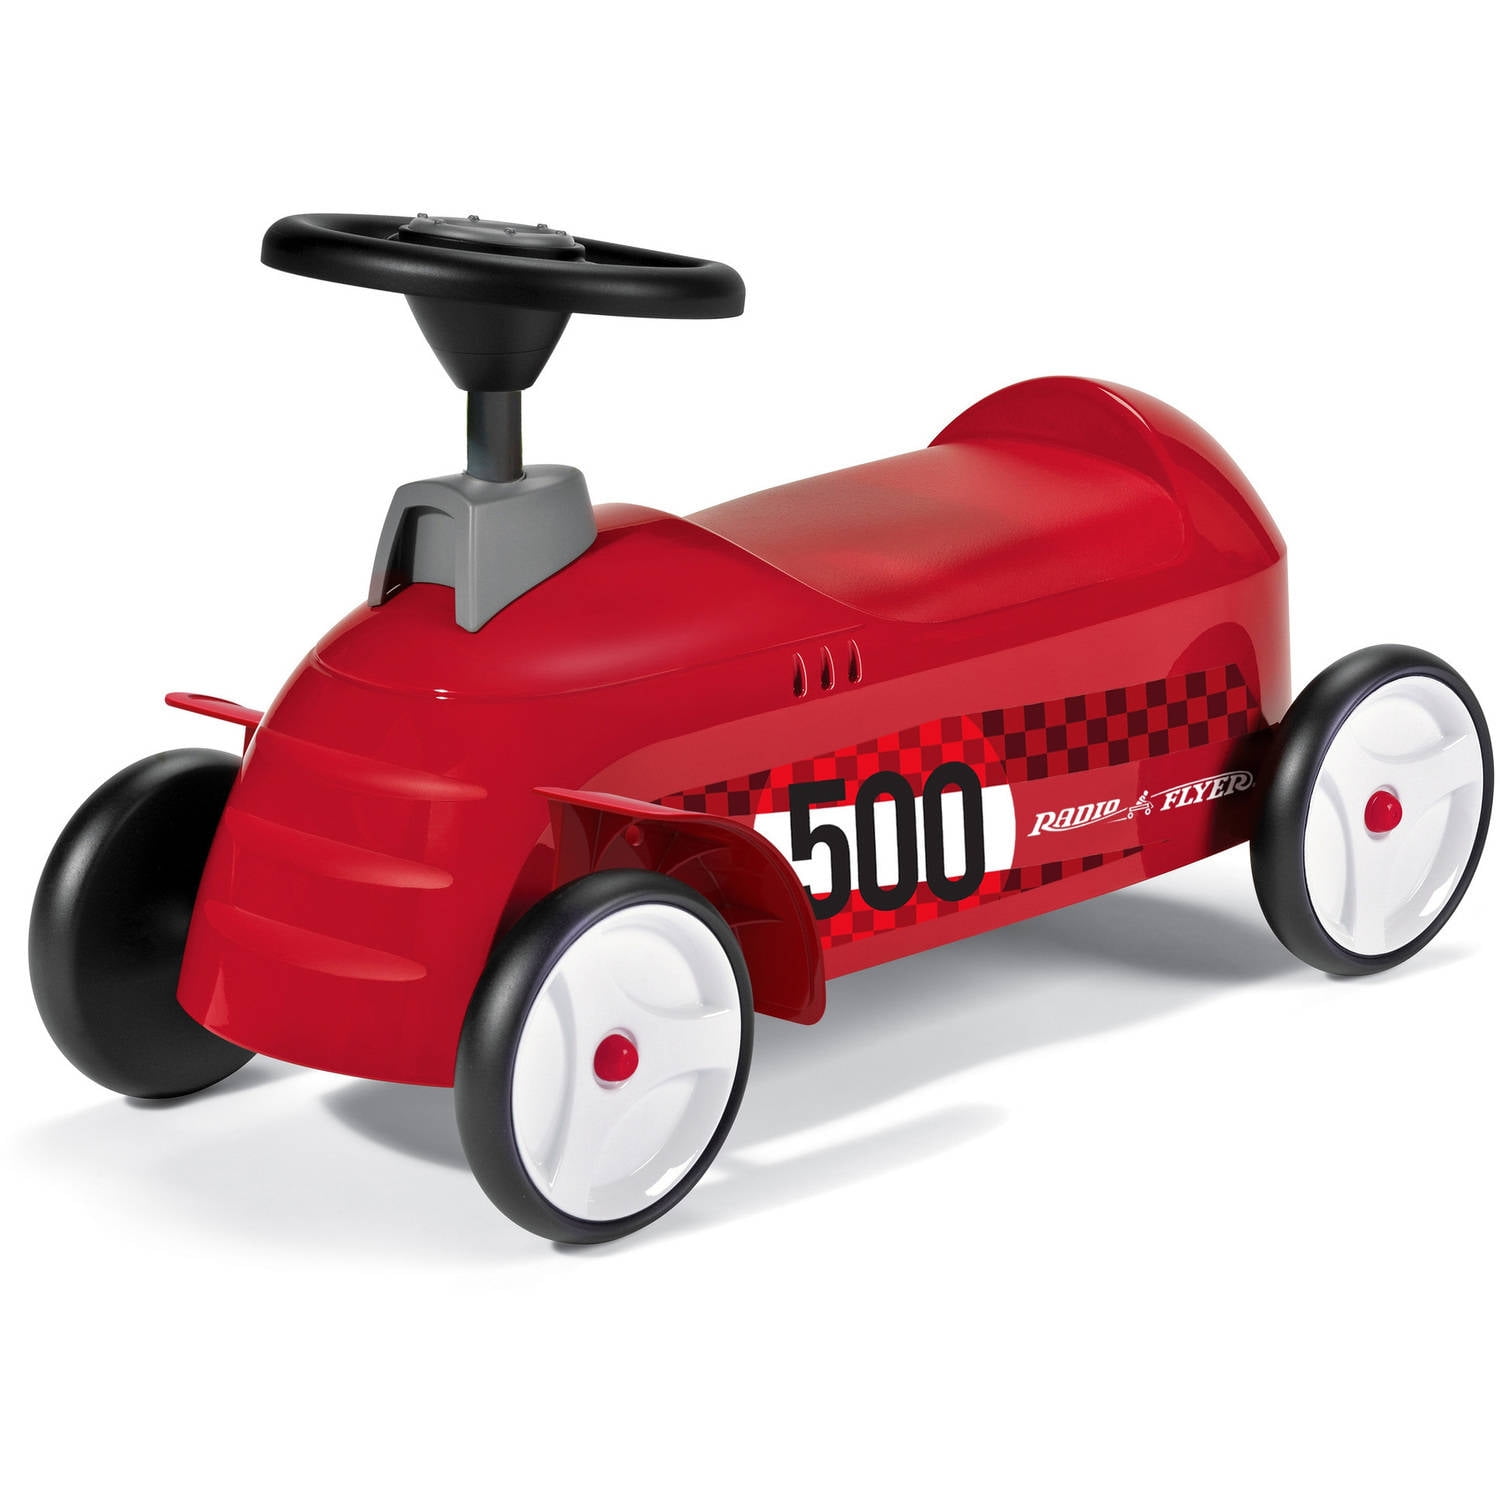 Radio Flyer, Flyer 500 Ride-on with Ramp and Car, Red - 3